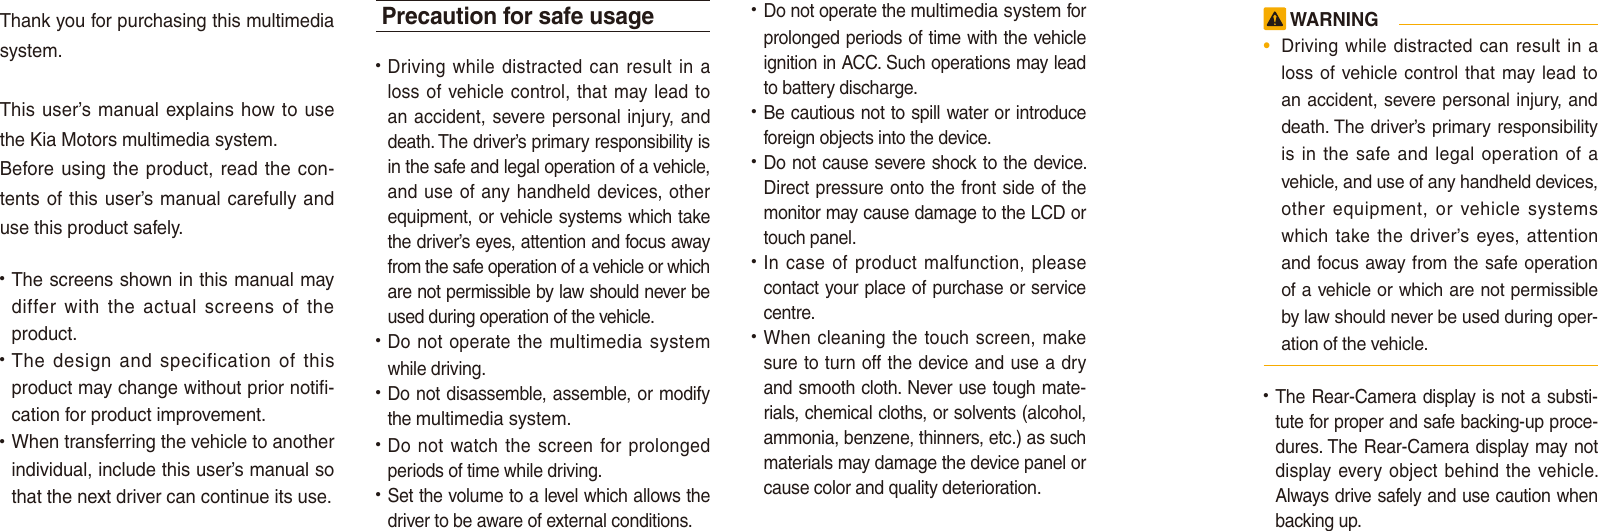 Thank you for purchasing this multimedia system.This user’s manual explains how to use the Kia Motors multimedia system.Before using the product, read the con-tents of this user’s manual carefully and use this product safely.• The screens shown in this manual may differ  with  the  actual  screens  of  the product.• The  design  and  specification  of  this product may change without prior notifi-cation for product improvement.• When transferring the vehicle to another individual, include this user’s manual so that the next driver can continue its use.Precaution for safe usage•  Driving  while distracted can result  in a loss of vehicle control, that may lead to an accident,  severe personal injury, and death. The driver’s primary responsibility is in the safe and legal operation of a vehicle, and use of any handheld devices, other equipment, or vehicle systems which take the driver’s eyes, attention and focus away from the safe operation of a vehicle or which are not permissible by law should never be used during operation of the vehicle.• Do not operate the multimedia system while driving. • Do not disassemble, assemble, or modify the multimedia system.•  Do not  watch the  screen  for prolonged periods of time while driving. •  Set the volume to a level which allows the driver to be aware of external conditions.•  Do not operate the multimedia system for prolonged periods of time with the vehicle ignition in ACC. Such operations may lead to battery discharge.• Be cautious not to spill water or introduce foreign objects into the device.• Do not cause severe shock to the device. Direct pressure onto the front side of the monitor may cause damage to the LCD or touch panel. • In case  of product malfunction,  please contact your place of purchase or service centre.• When cleaning the touch screen, make sure to turn off the device and use a dry and smooth cloth. Never use tough mate-rials, chemical cloths, or solvents (alcohol, ammonia, benzene, thinners, etc.) as such materials may damage the device panel or cause color and quality deterioration.  WARNING•  Driving while distracted can result in a loss of vehicle control that  may lead  to an accident, severe personal injury, and death. The driver’s primary responsibility is in  the  safe and legal  operation  of  a vehicle, and use of any handheld devices, other  equipment,  or  vehicle  systems which take the driver’s eyes, attention and focus away from the safe operation of a vehicle or which are not permissible by law should never be used during oper-ation of the vehicle.• The Rear-Camera display is not a substi-tute for proper and safe backing-up proce-dures. The Rear-Camera display may not display every object  behind the vehicle. Always drive safely and use caution when backing up.